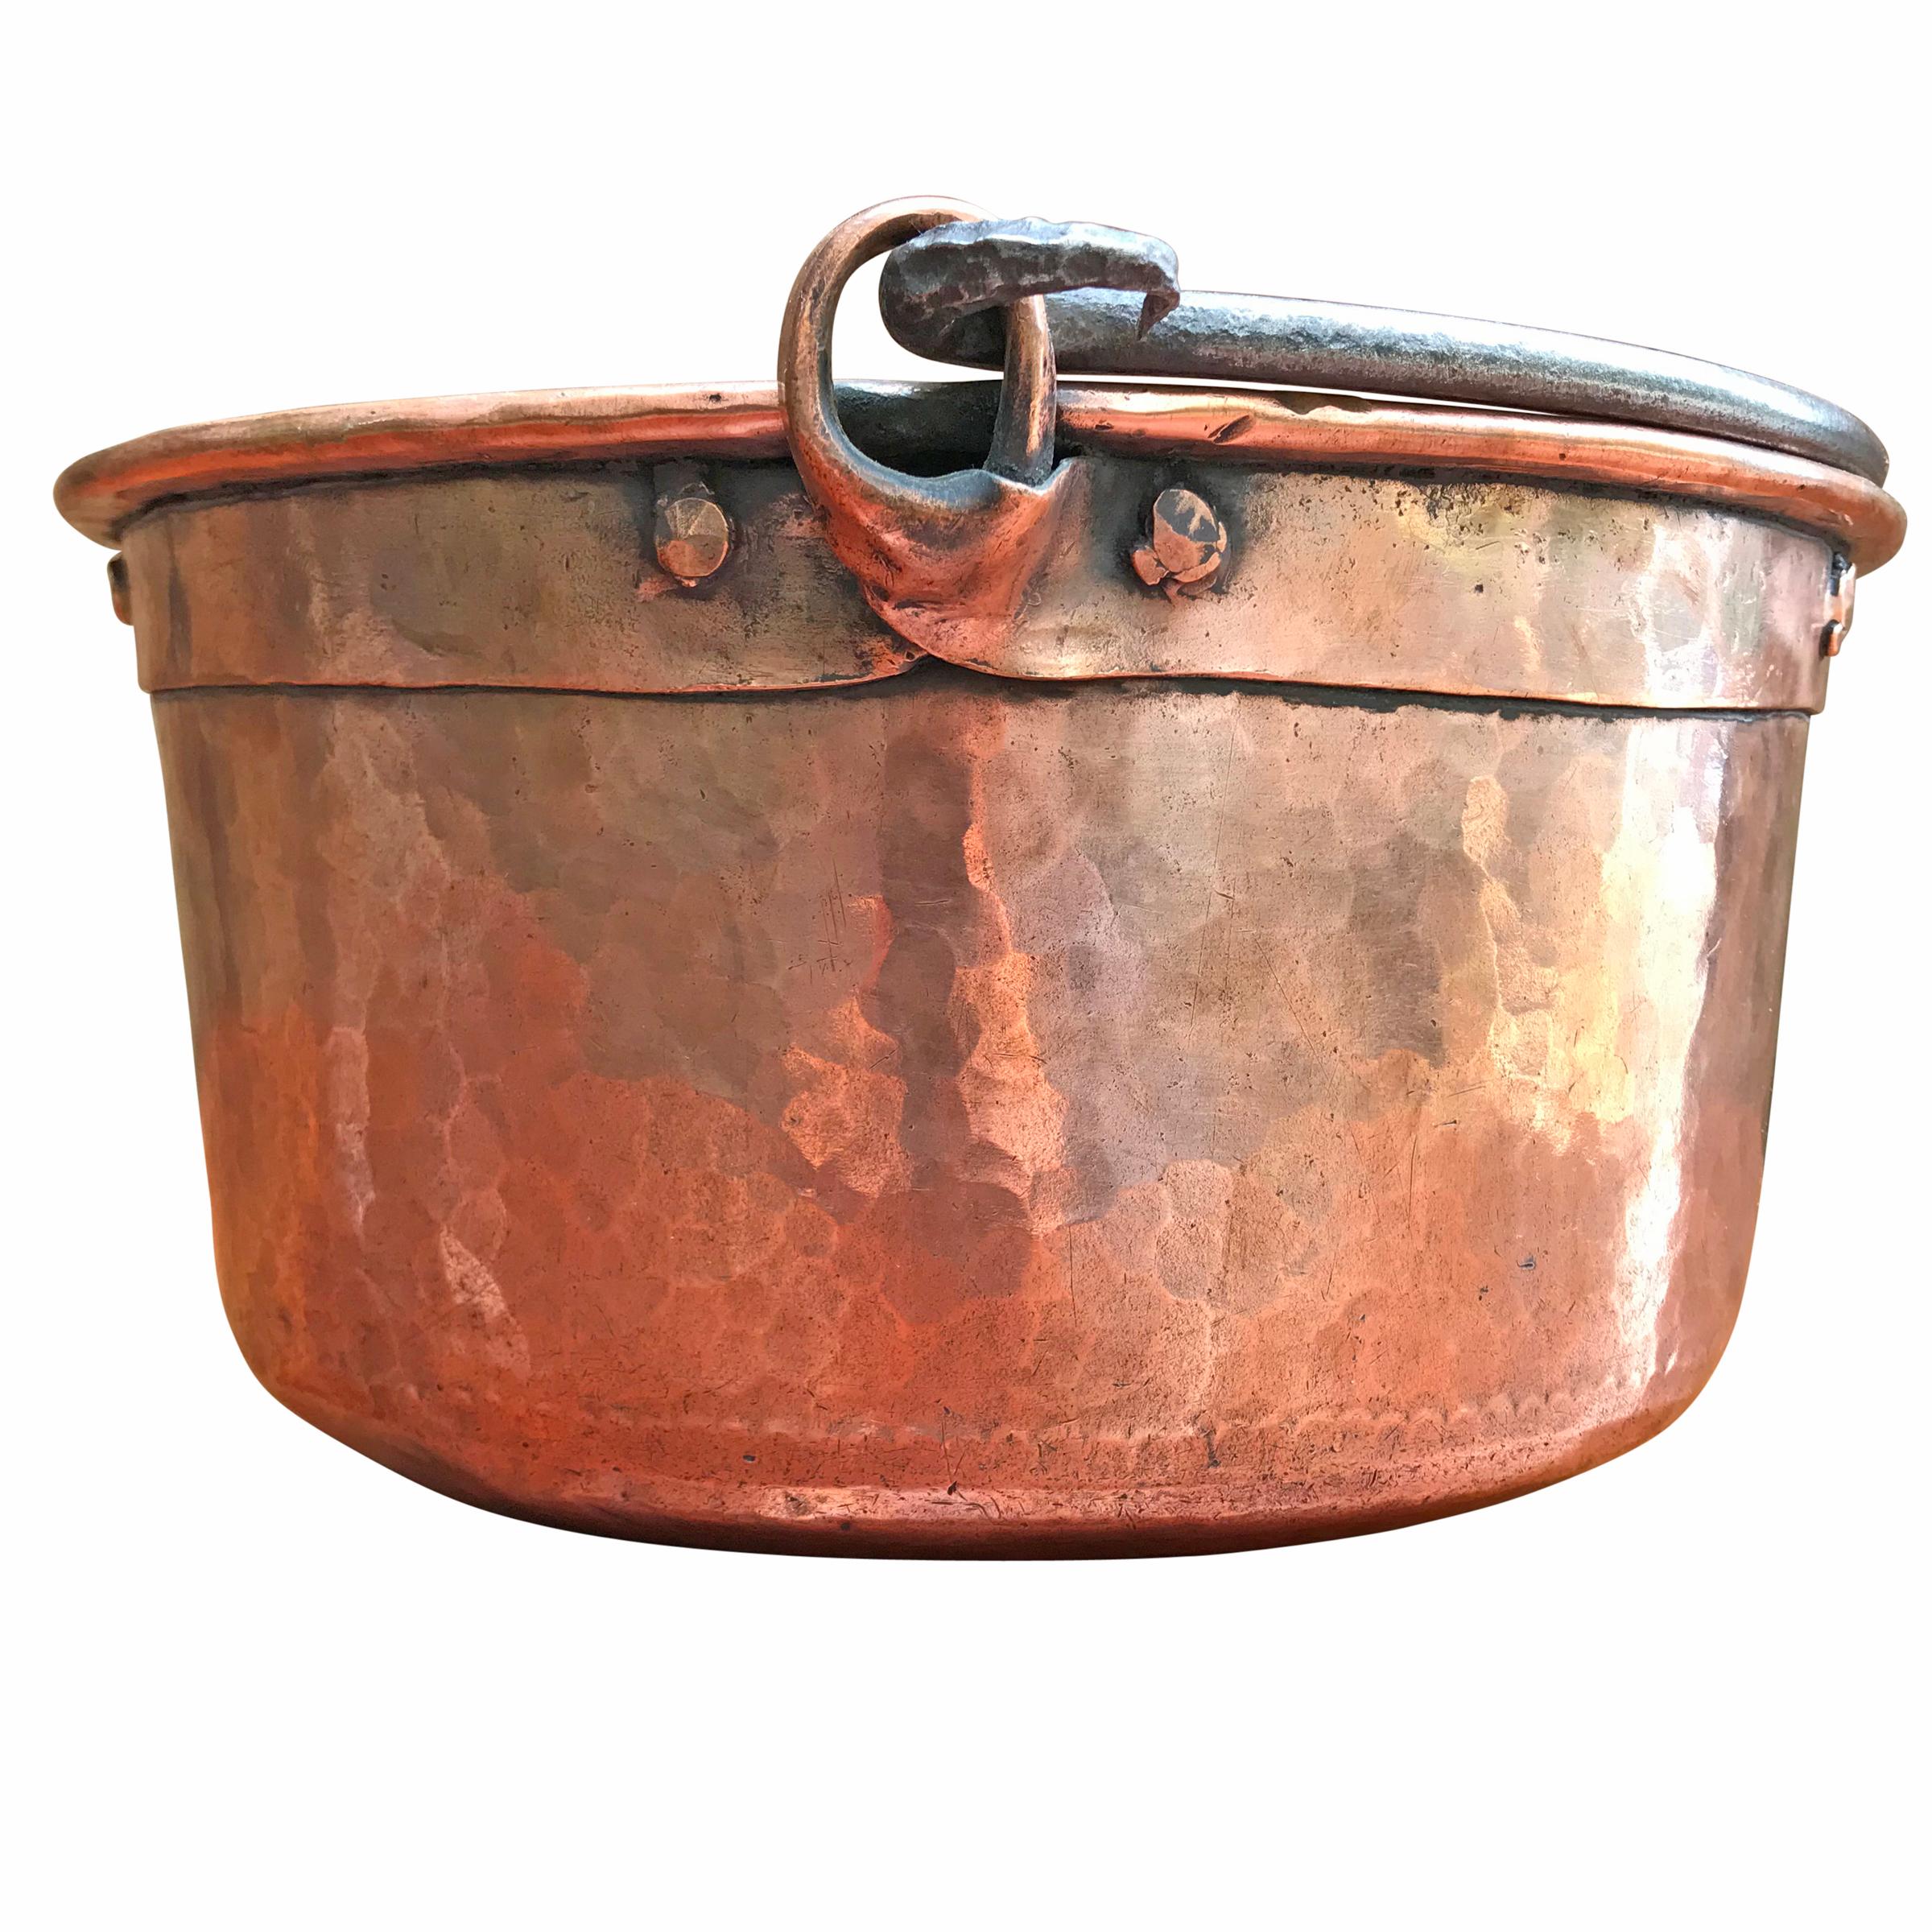 Primitive Early 19th Century French Hammered Copper Kettle